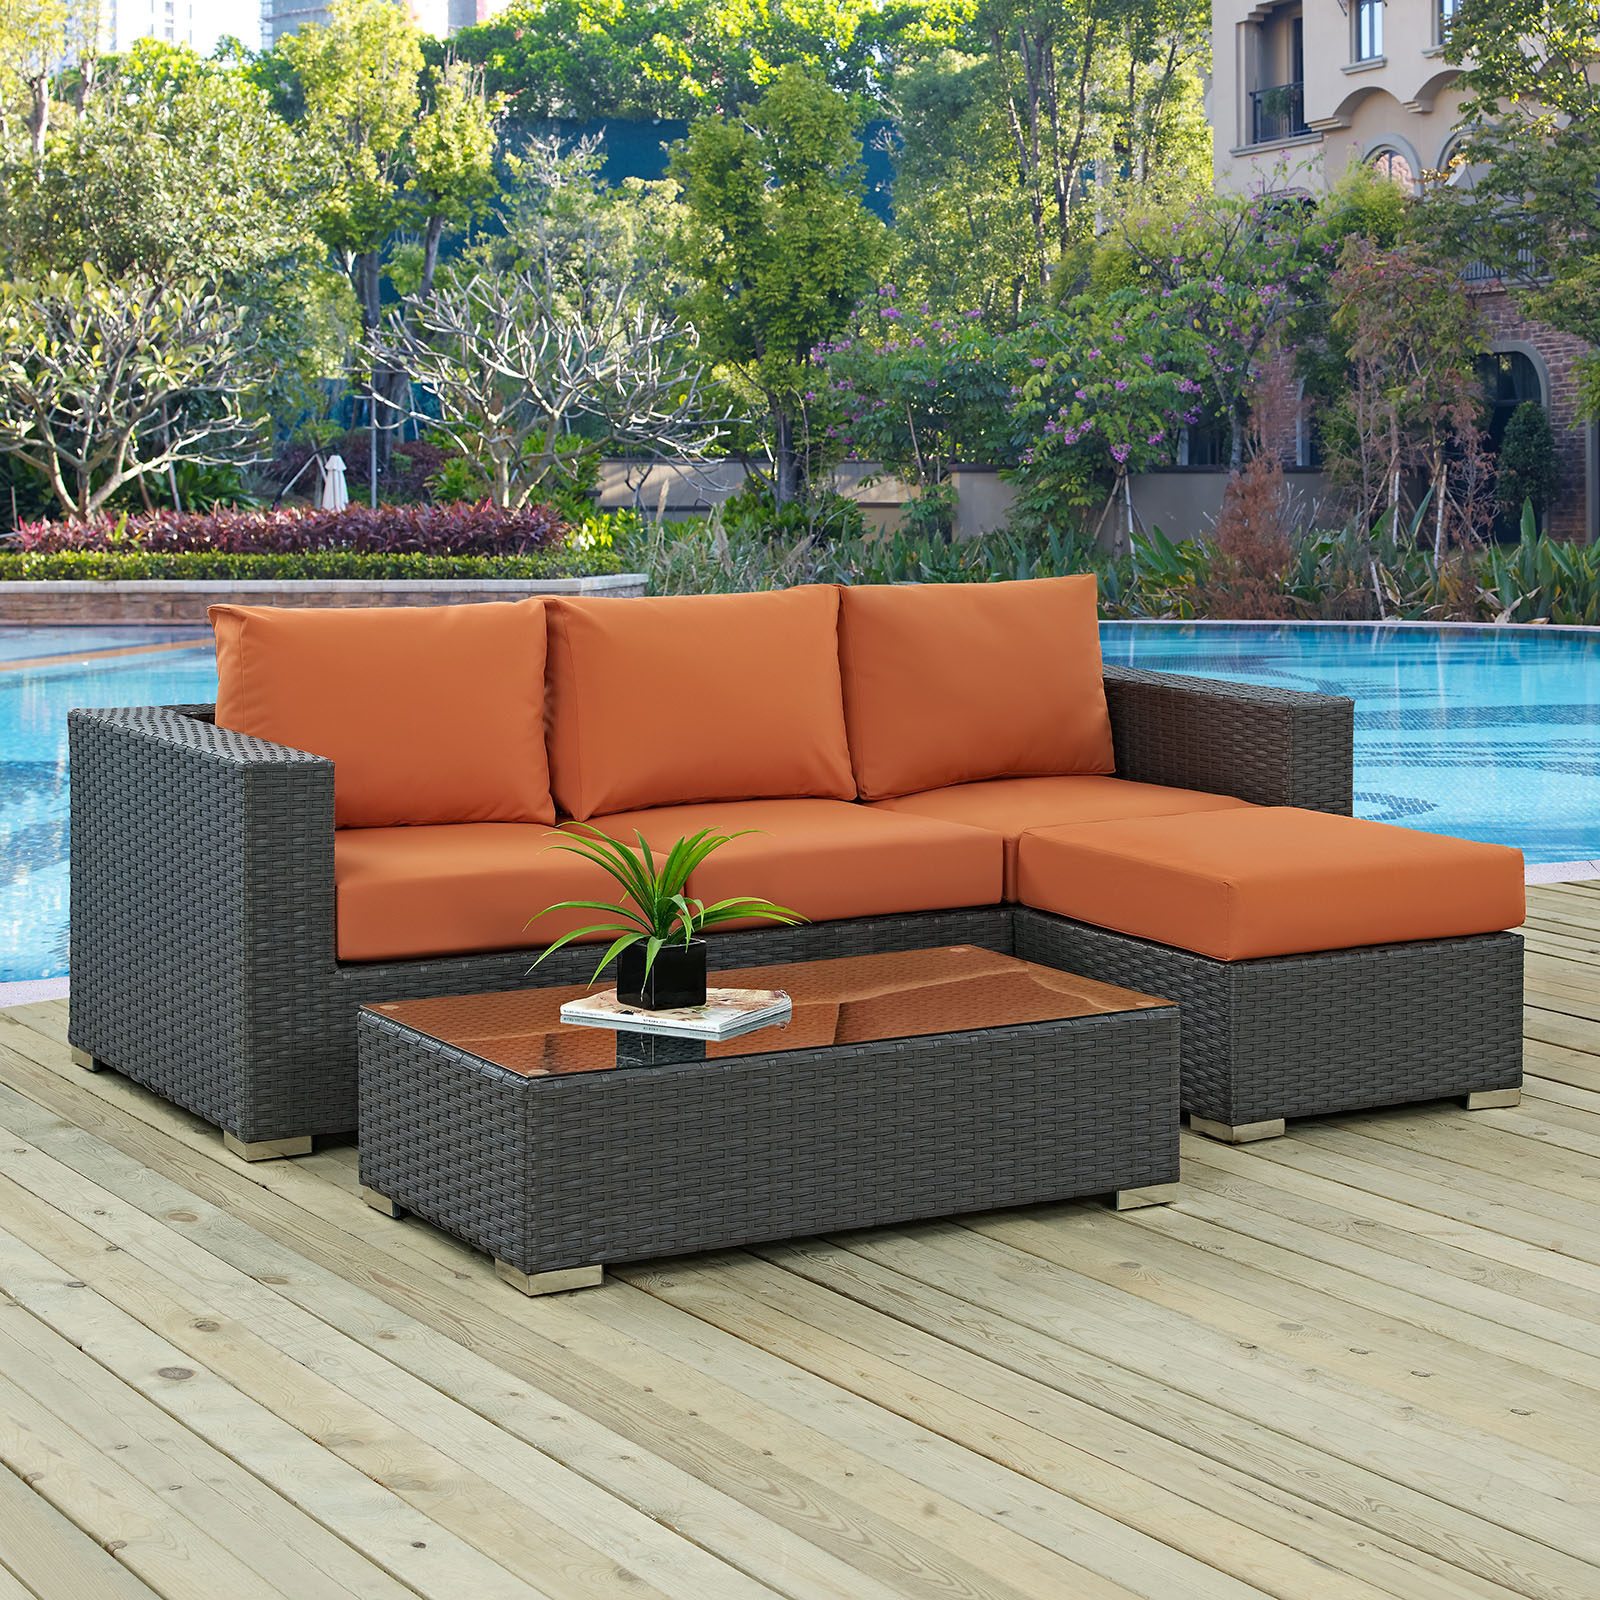 Modway Sojourn 3 Piece Outdoor Patio Sunbrella? Sectional Set in Canvas Tuscan - image 1 of 7